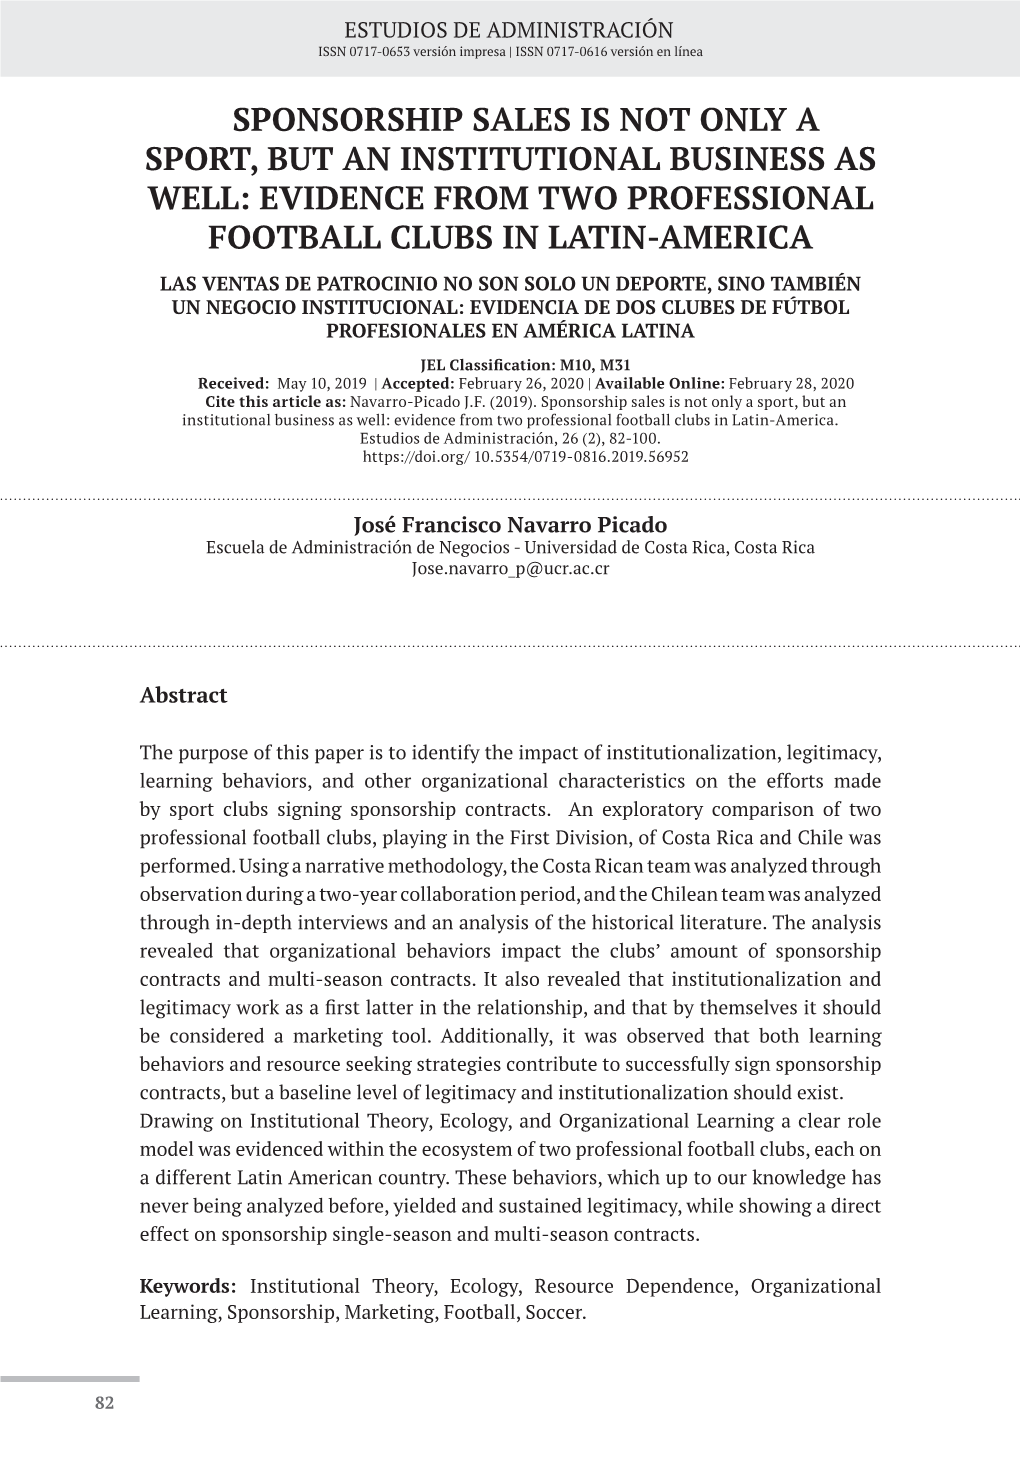 Evidence from Two Professional Football Clubs in Latin-America